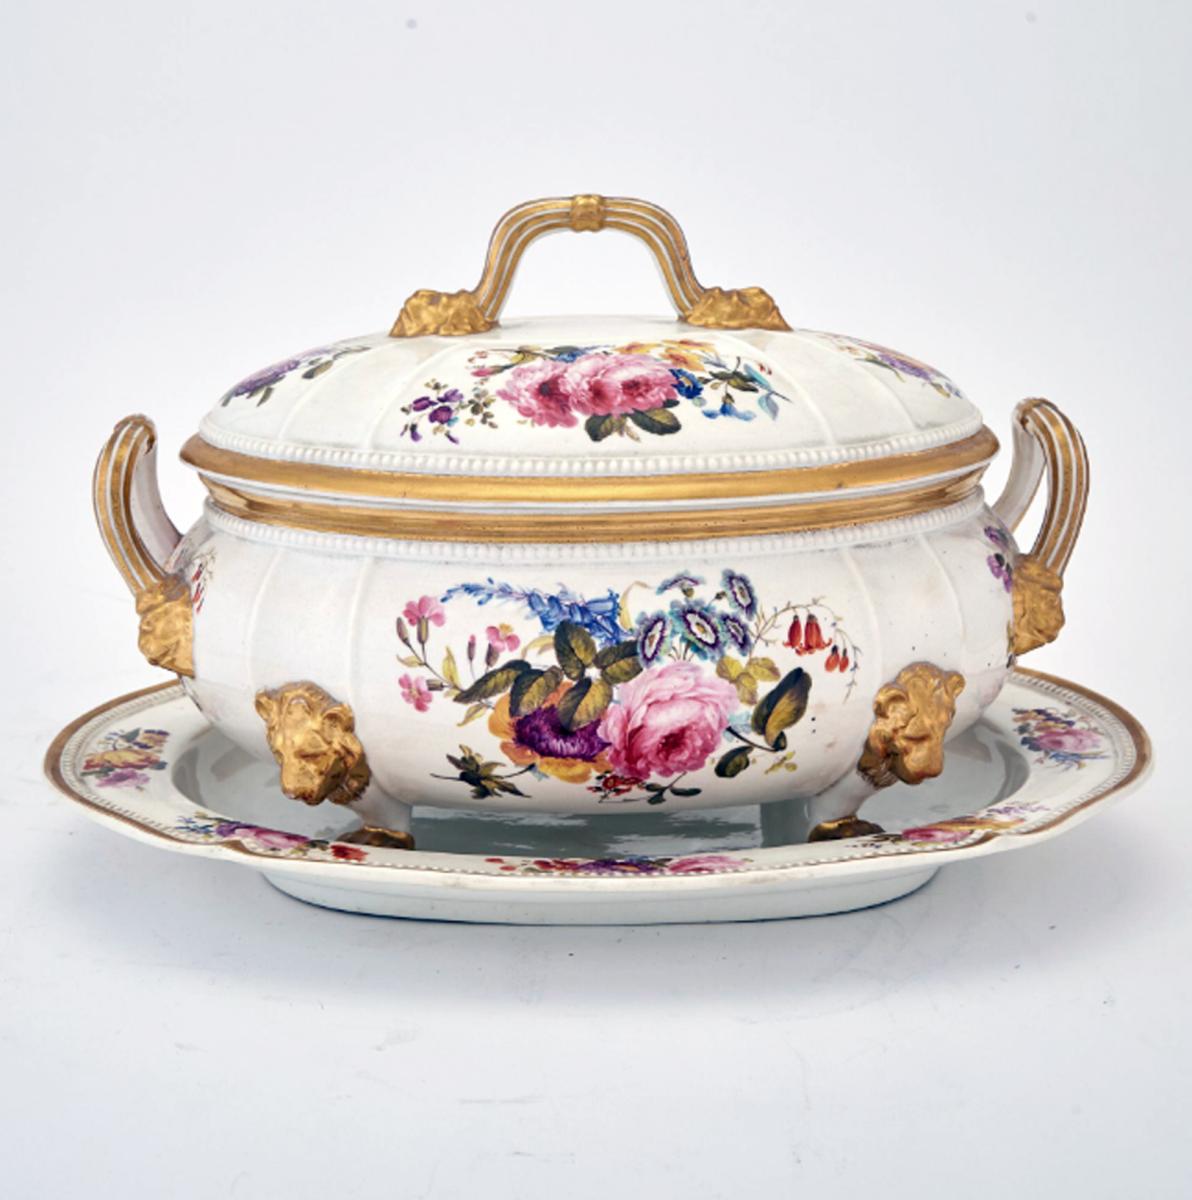 Derby Porcelain Large Botanical Soup Tureen, Cover & Stand, Circa 1815-25